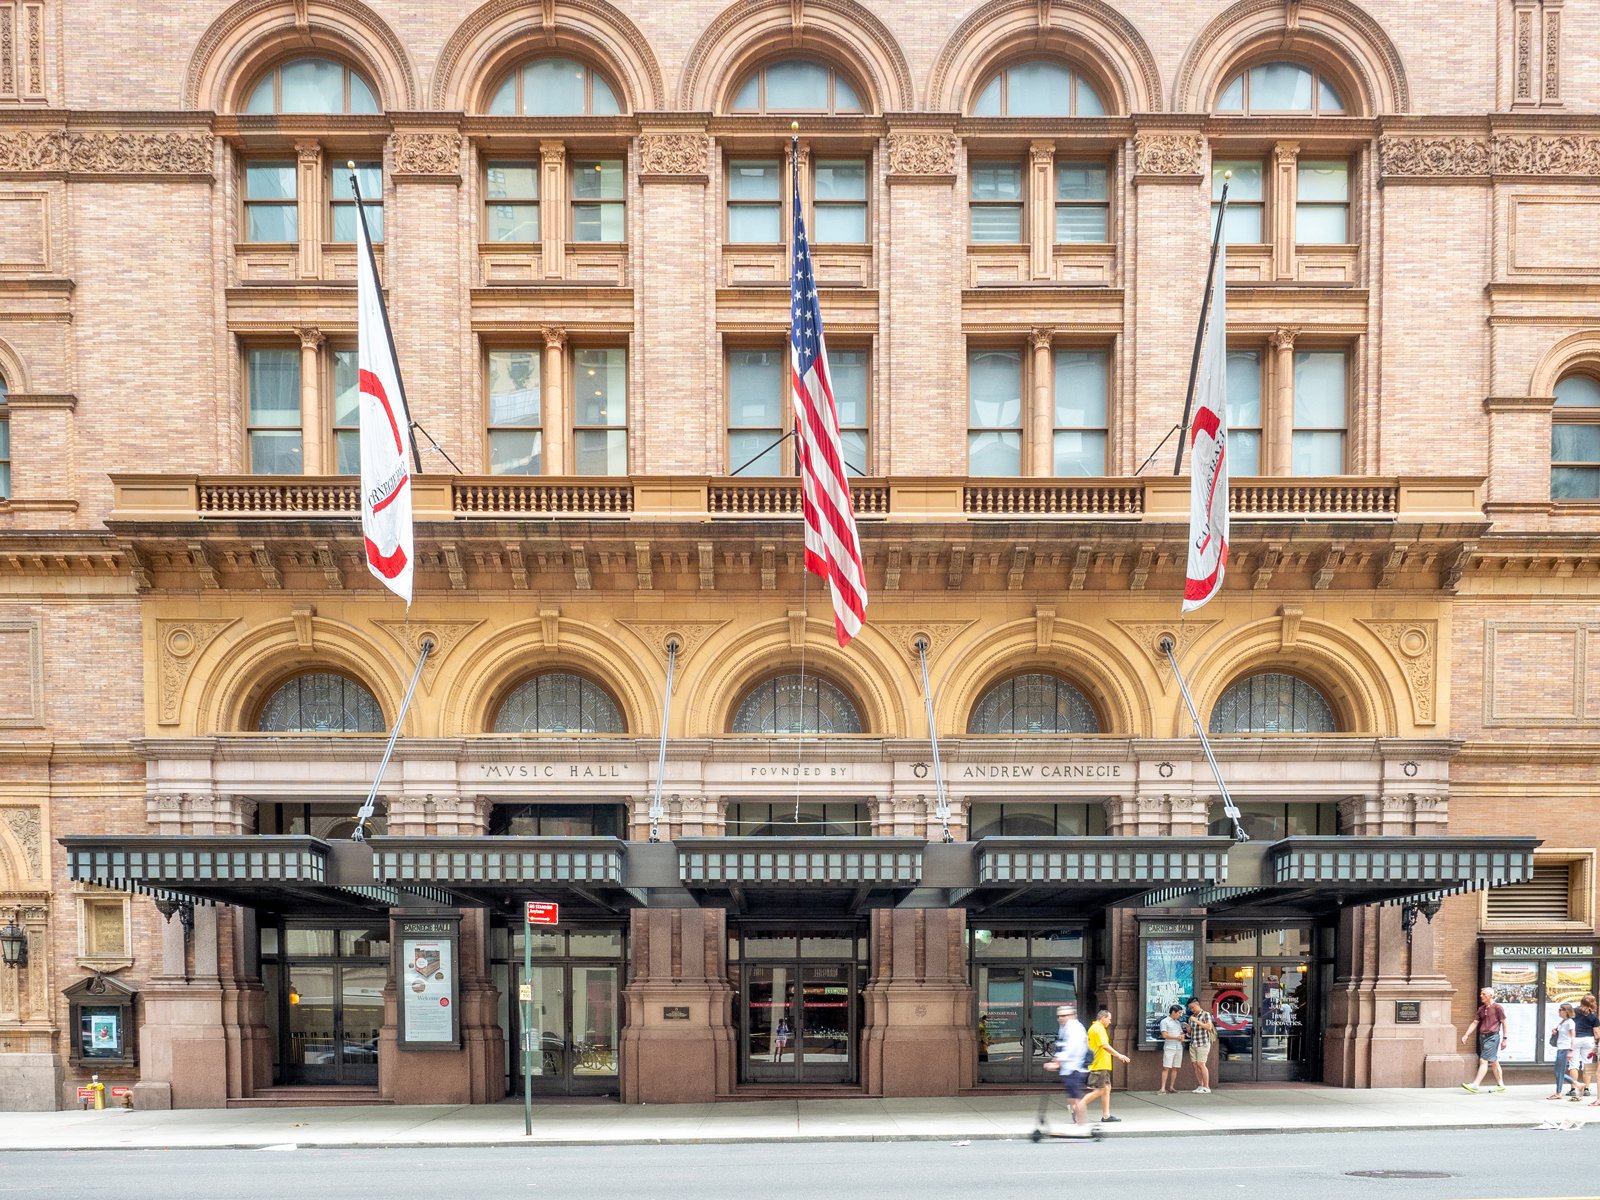 The venerable Carnegie Hall (image: Ajay Suresh, Flickr, CC BY 2.0)